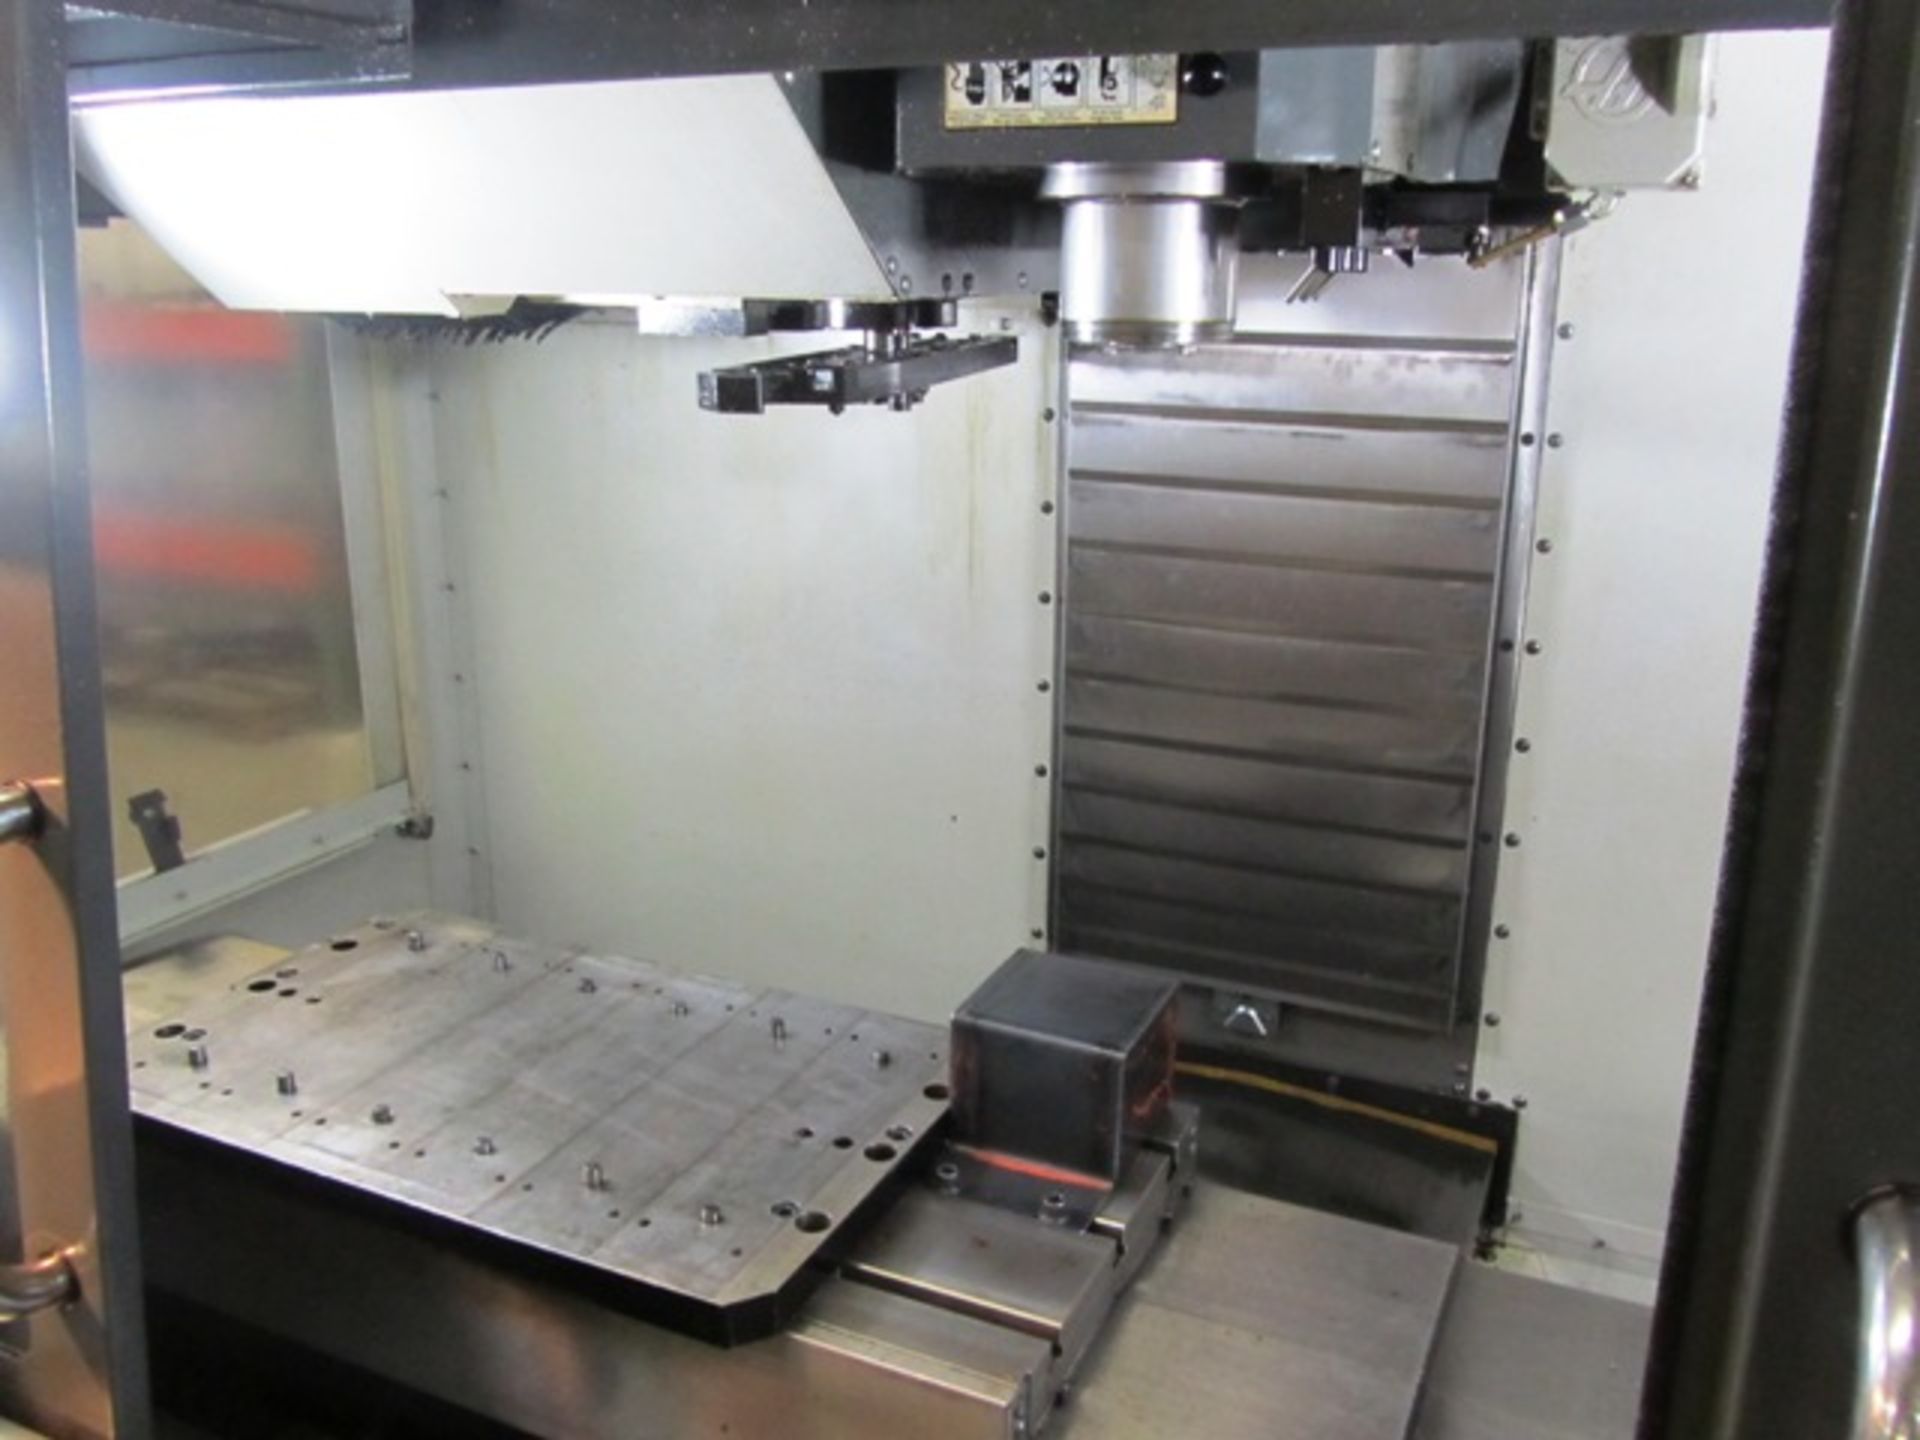 Haas VF-2 CNC Vertical Machining Center - Image 4 of 4